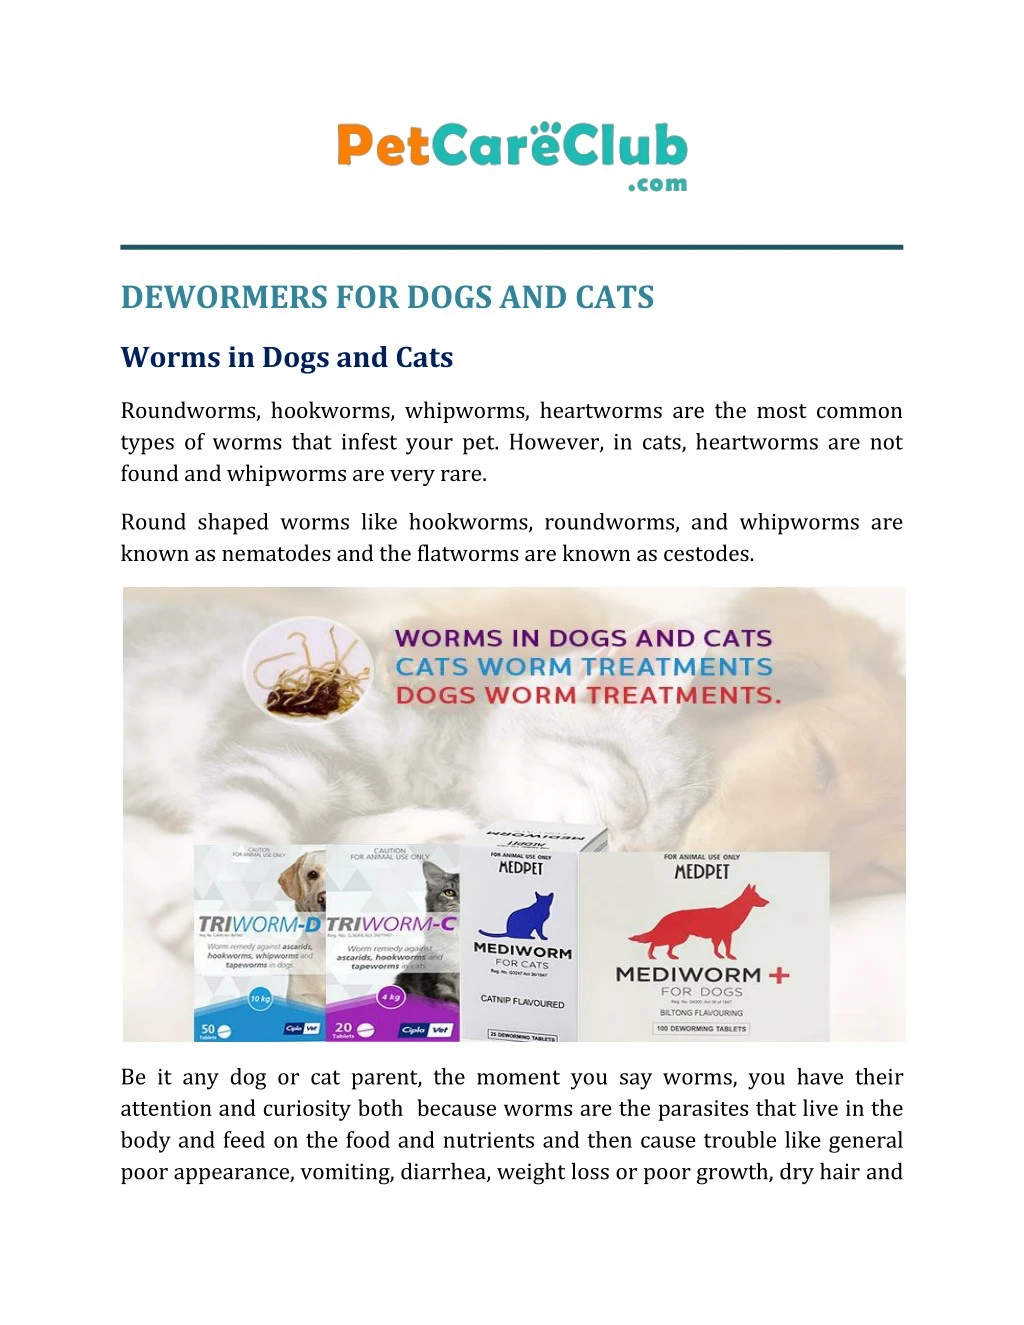 dewormers for dogs and cats